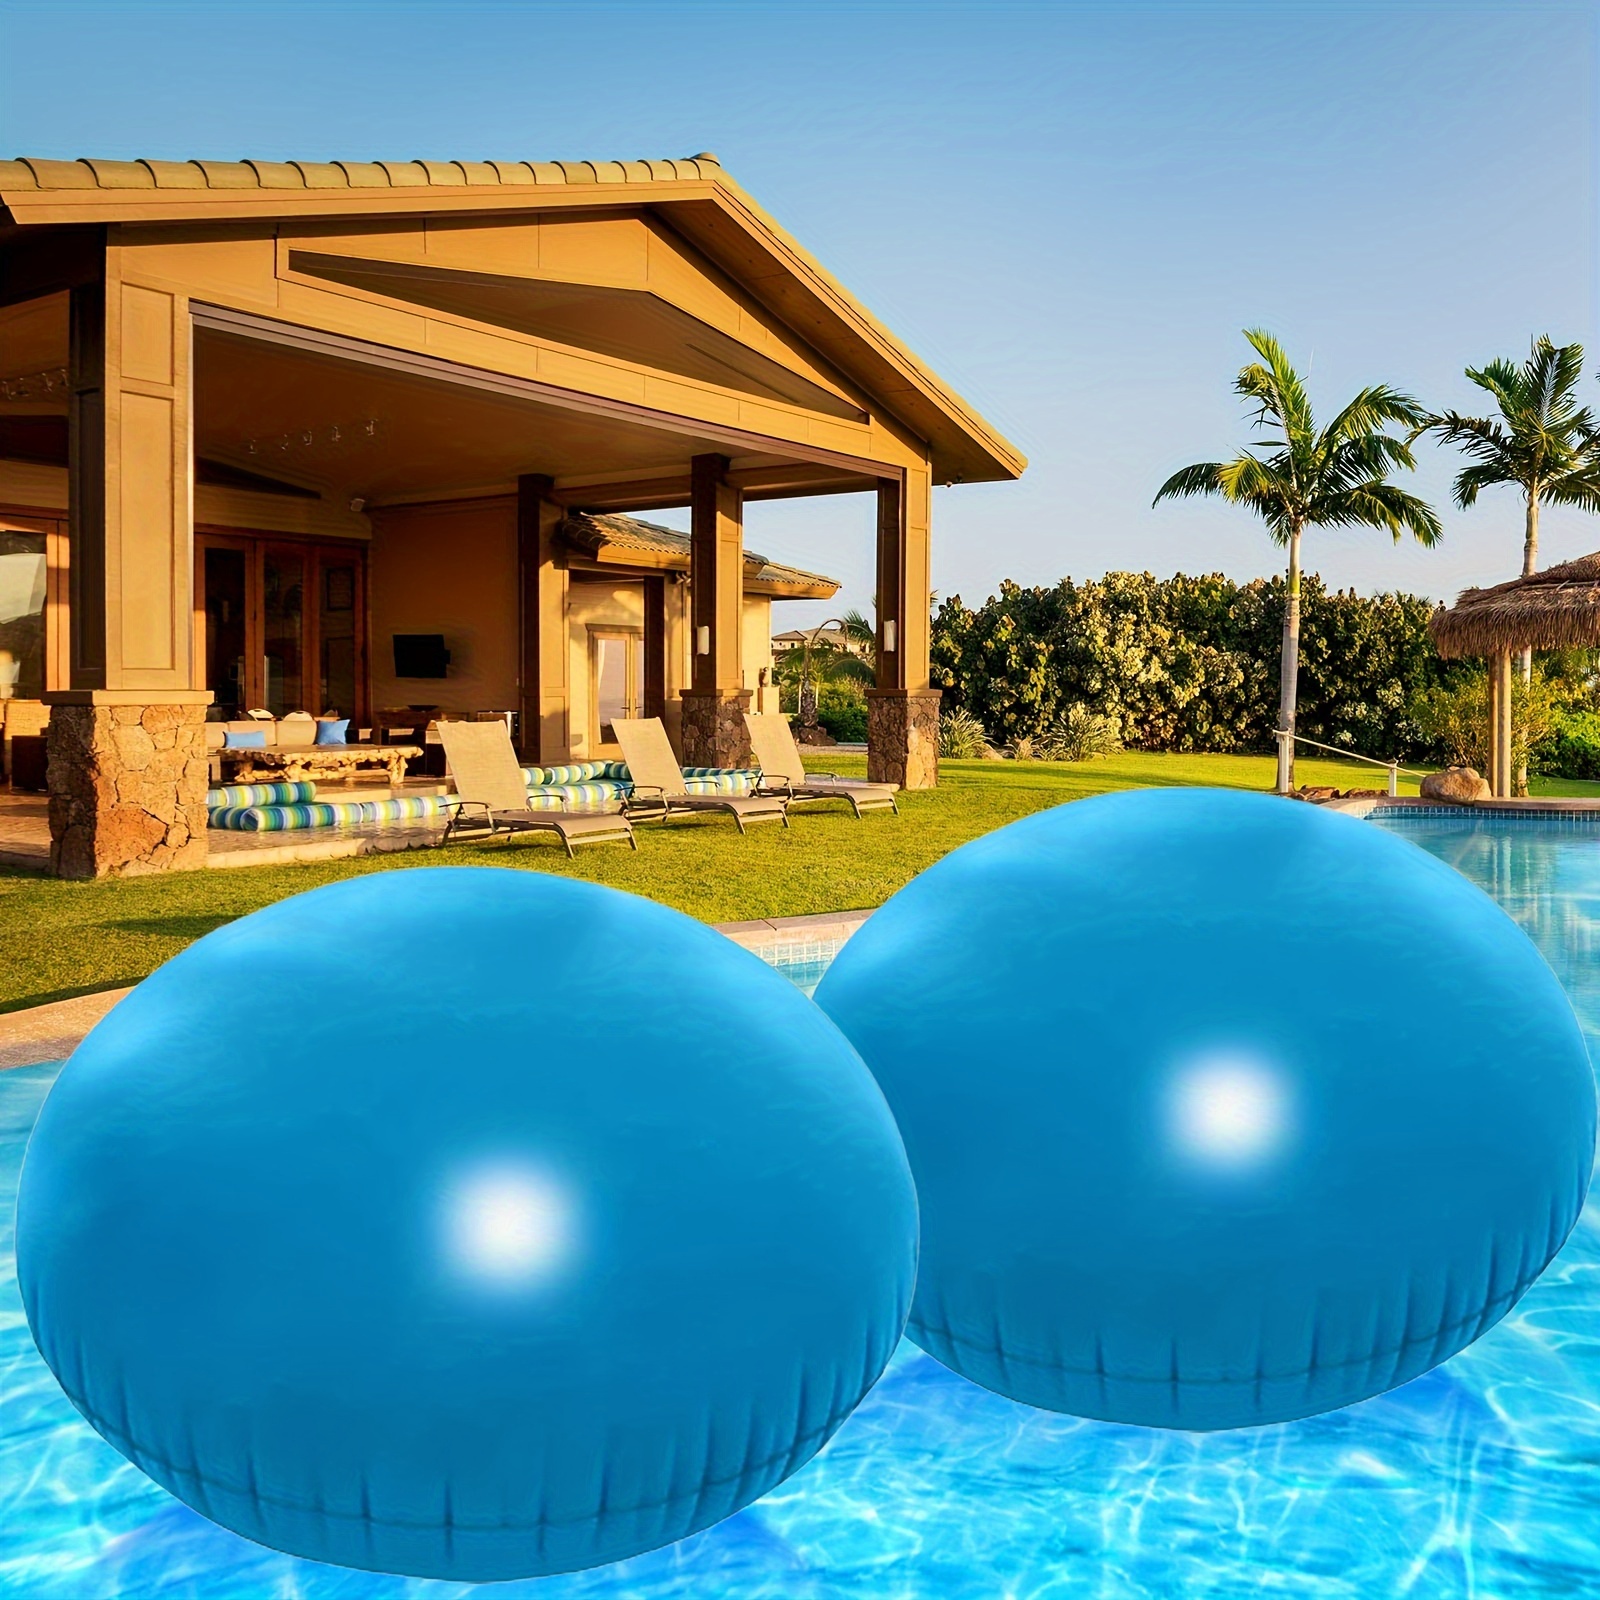 

Round 4ft Inflatable Pool Air Pillow Cushion For Above-ground Winter Pool Covers - Outdoor Swimming Accessory For Closing Winter Pools And Winterizing Kit